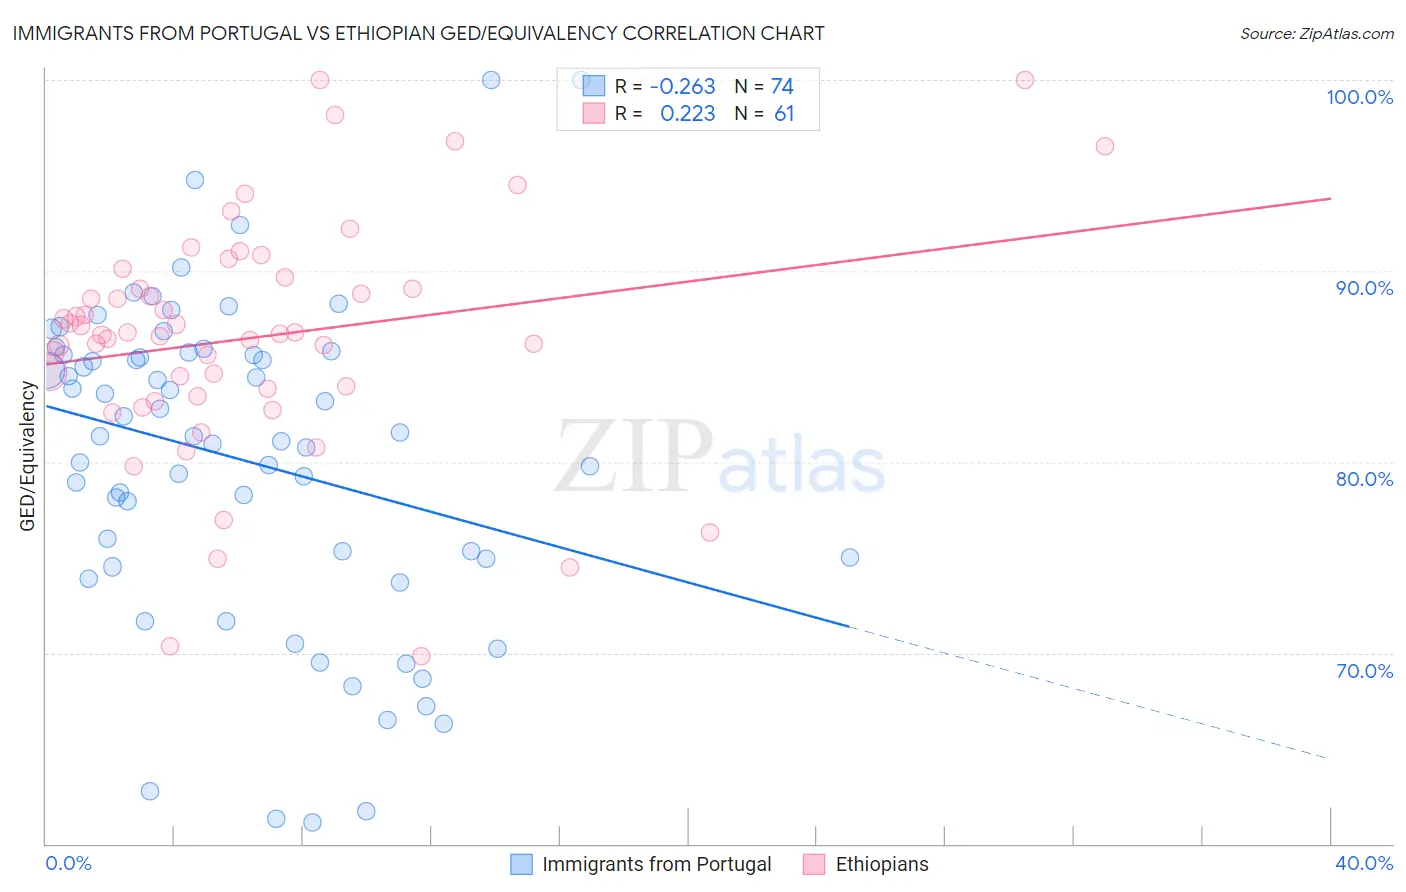 Immigrants from Portugal vs Ethiopian GED/Equivalency